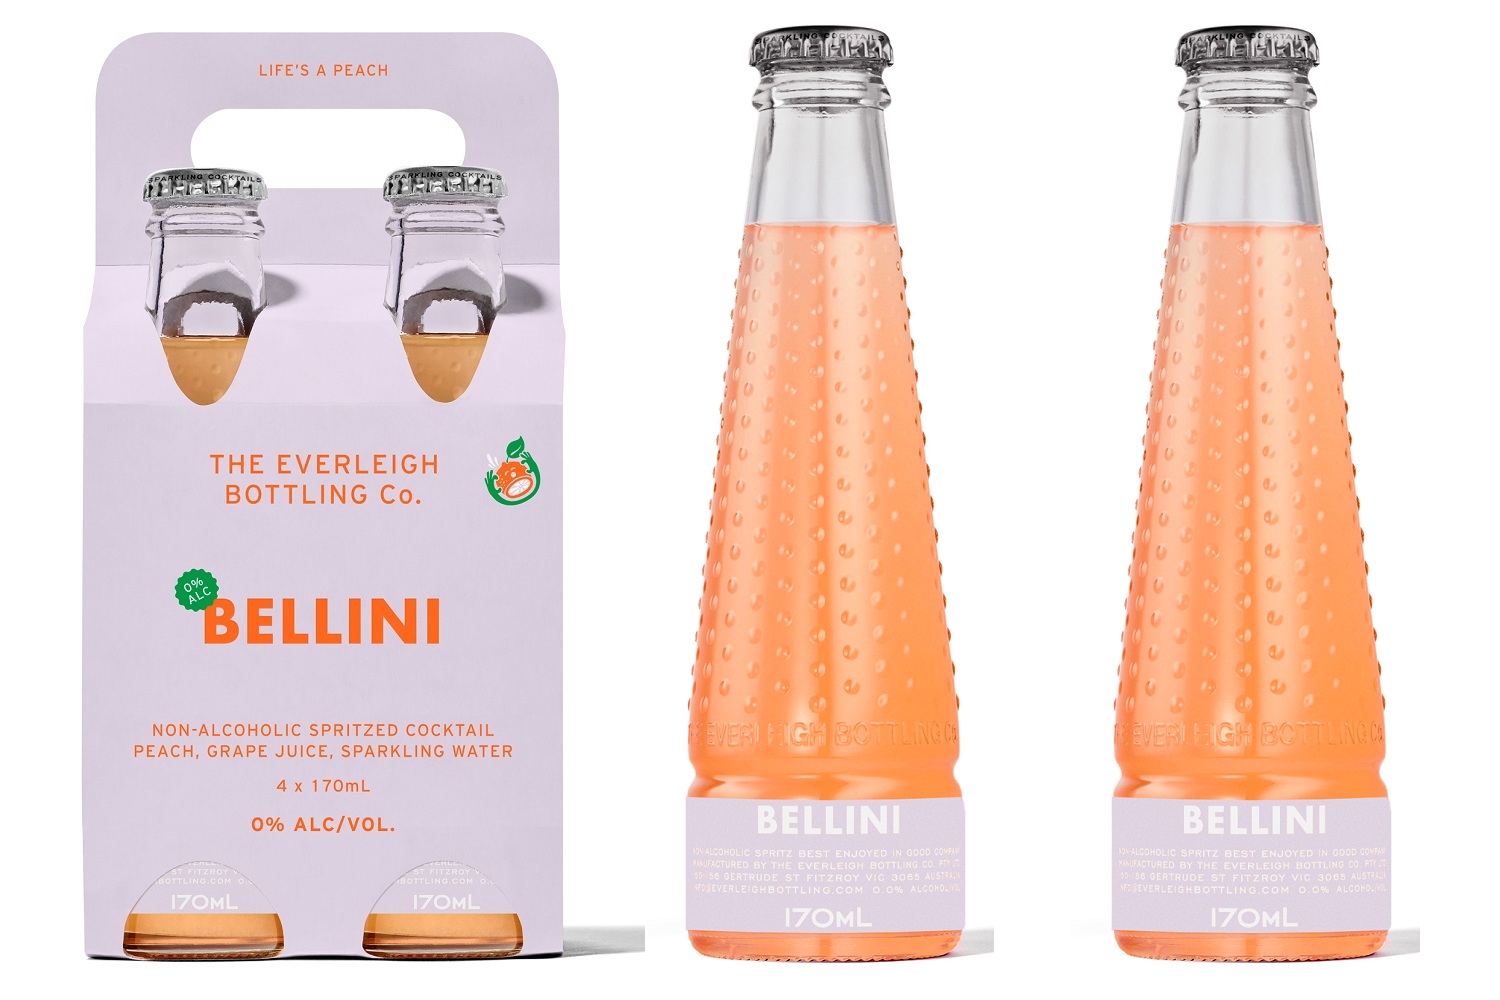 Bellini by the Everleigh bottling co